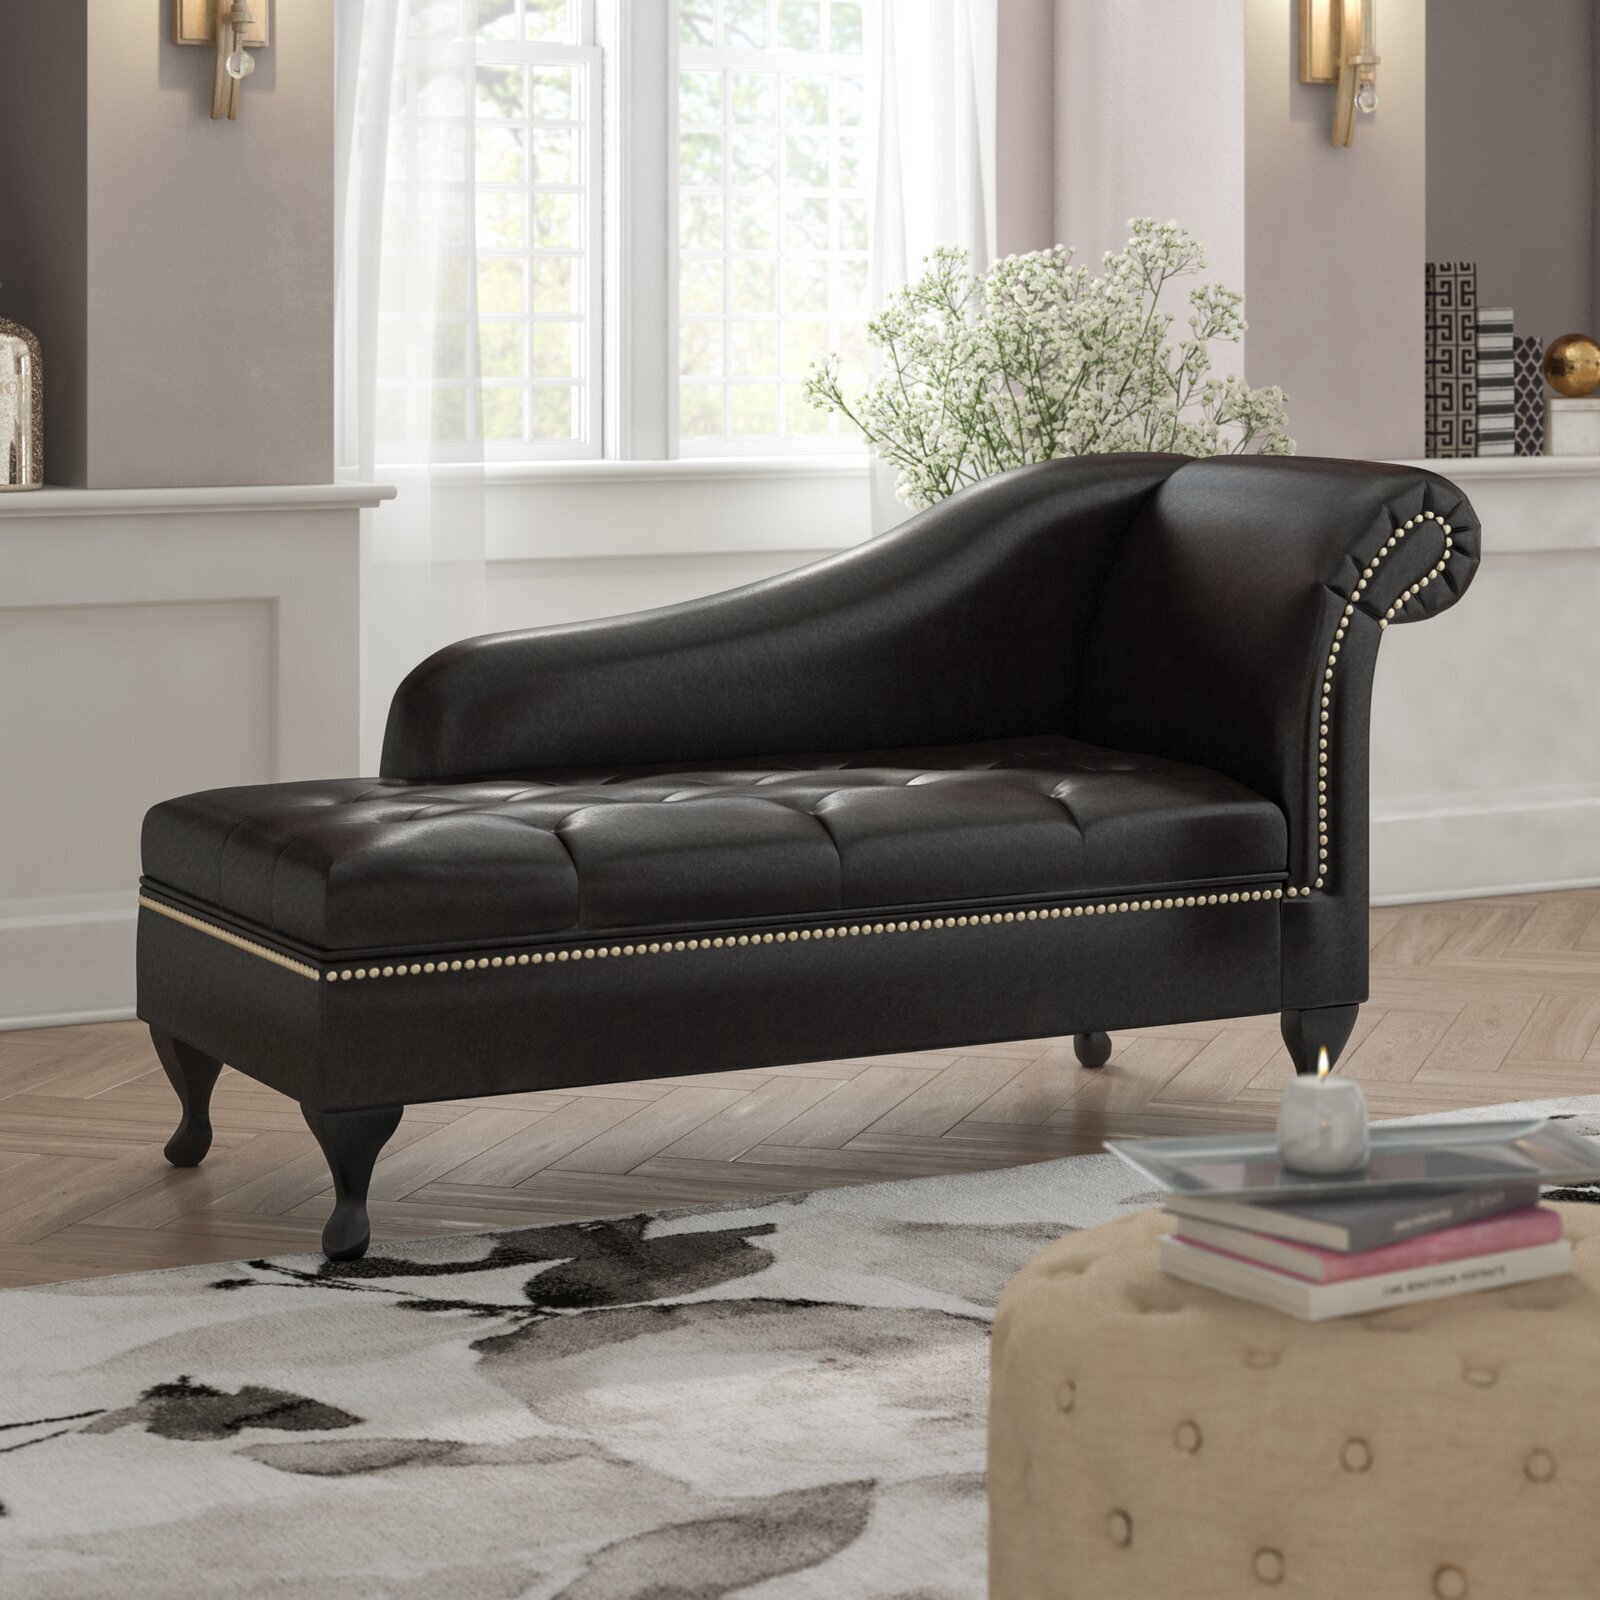 Elegant leather lounger in a French design